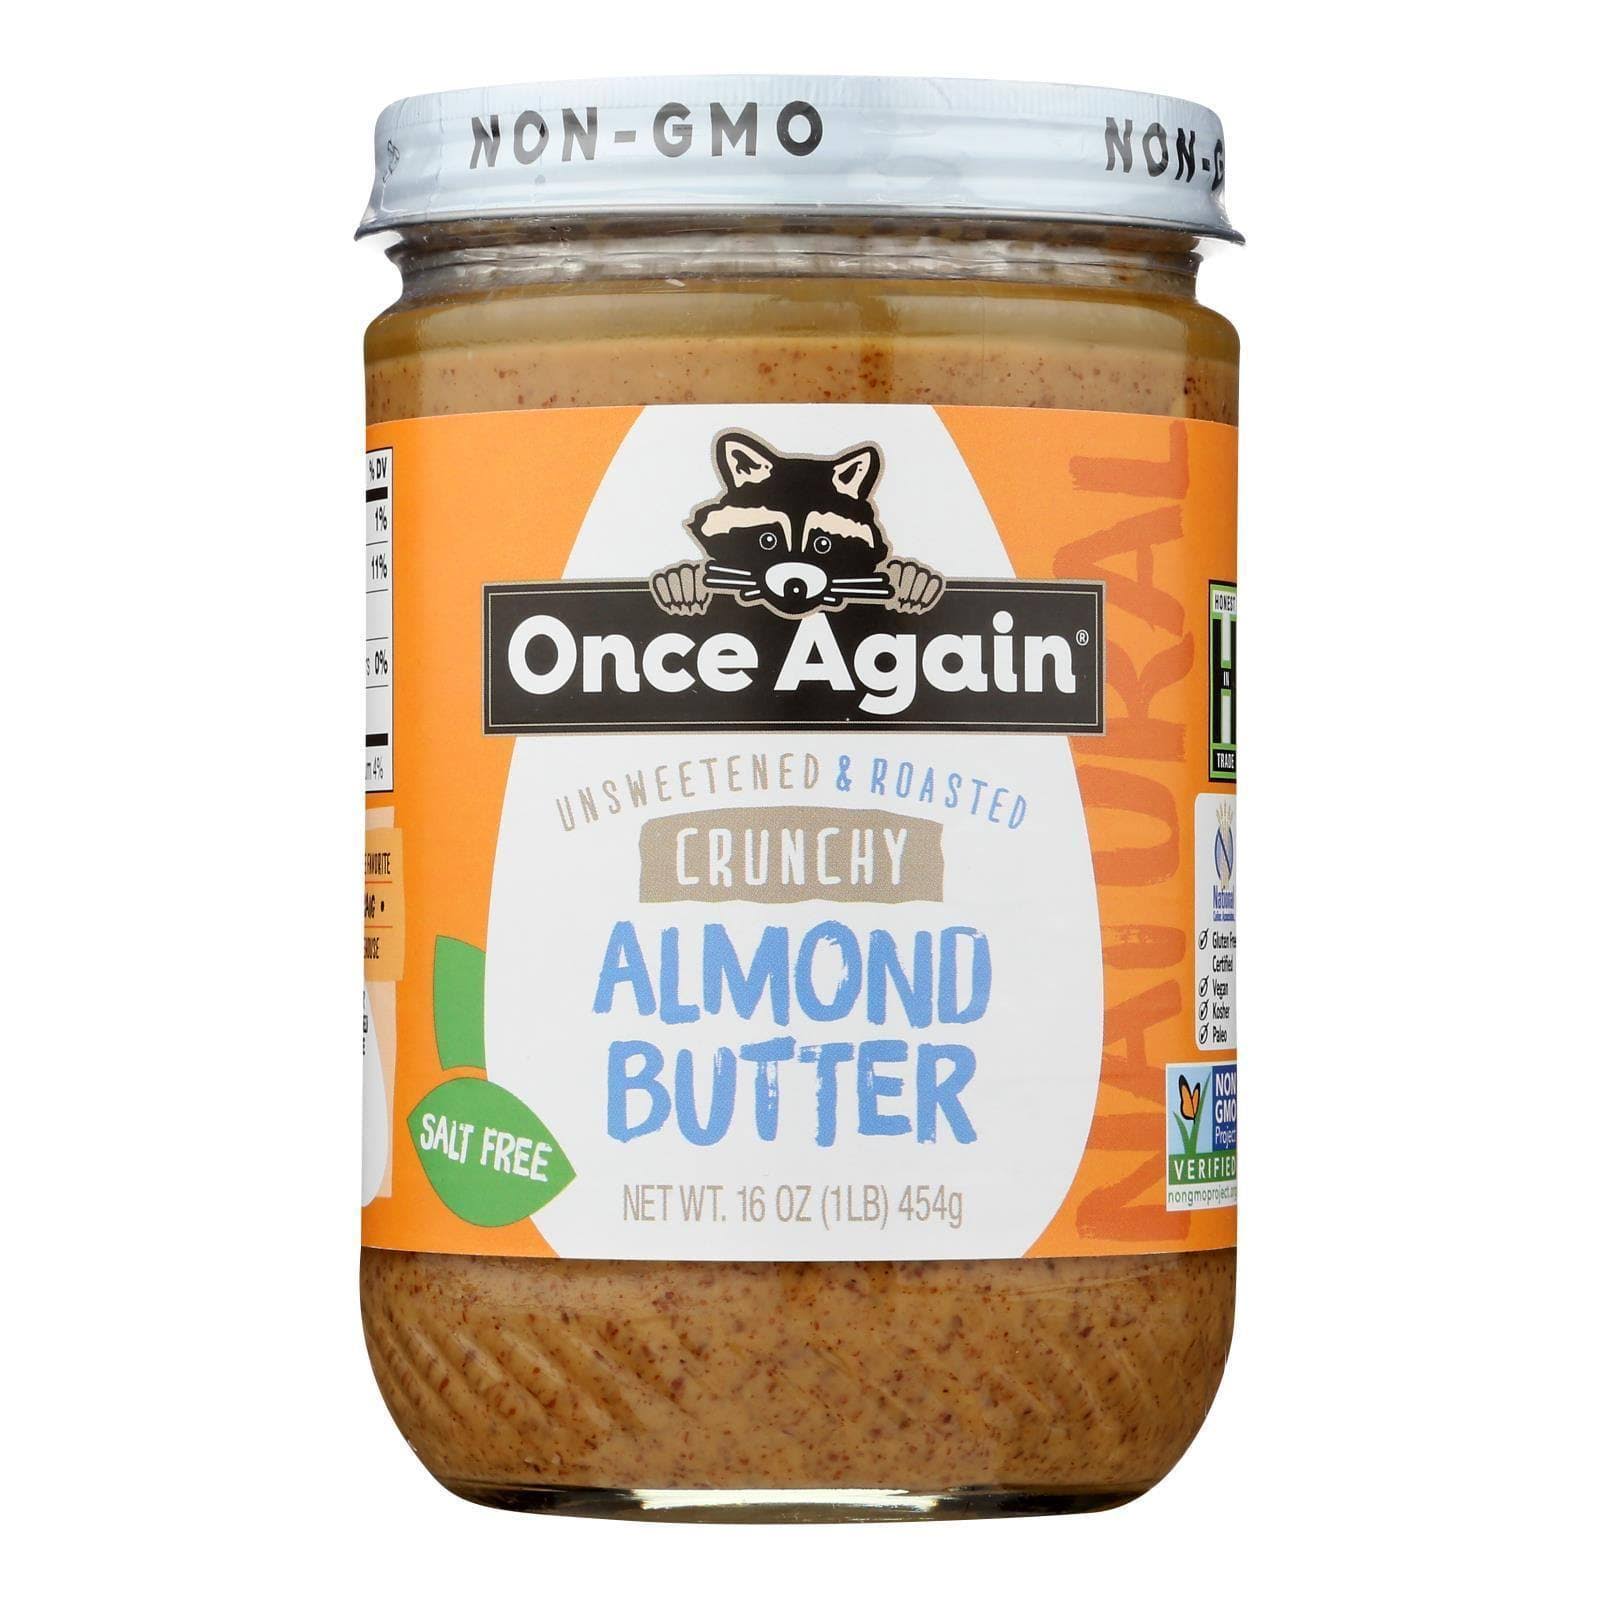 Once Again Natural Crunchy Almond Butter